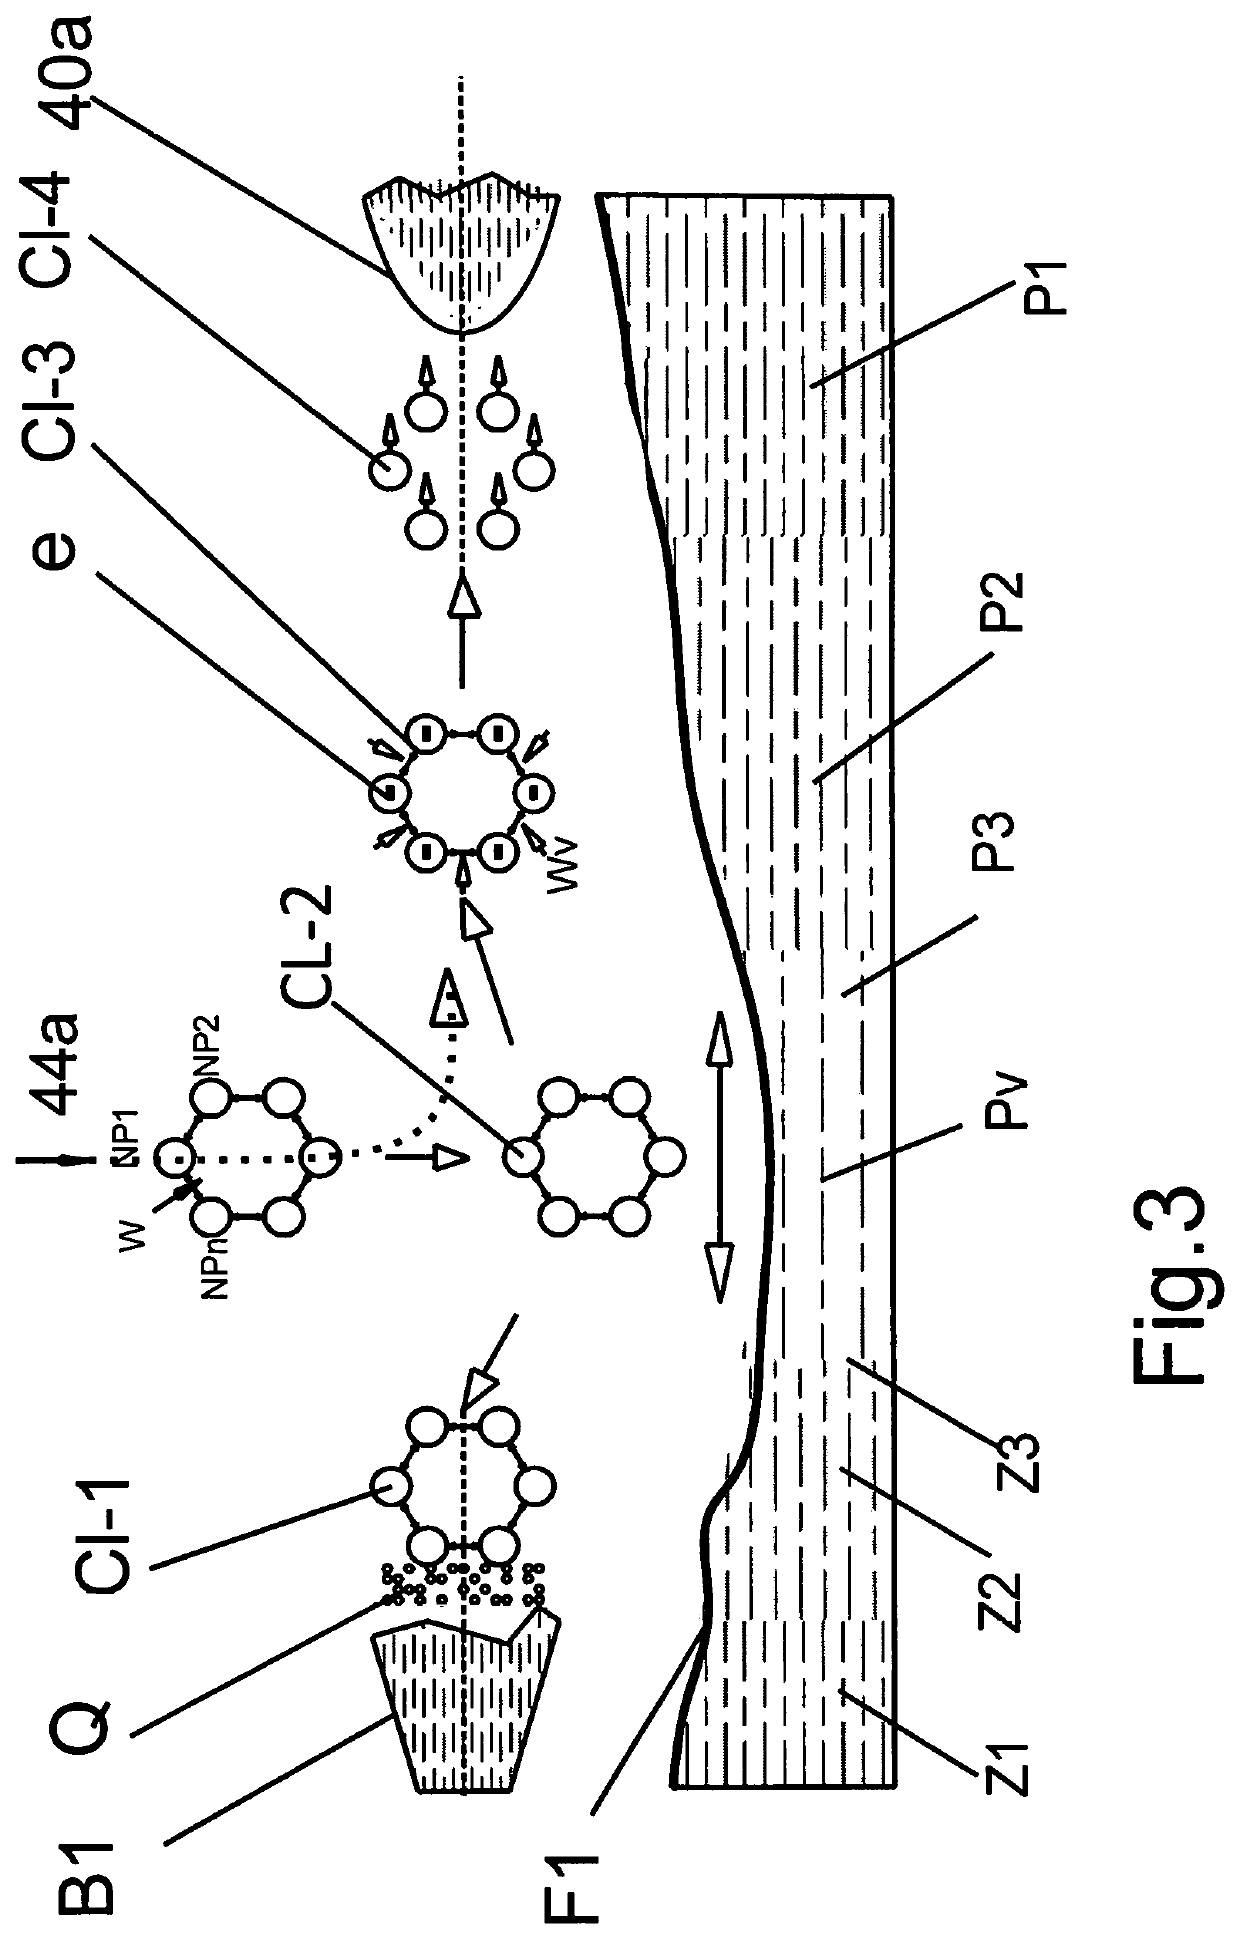 3D printing apparatus using a beam of an atmospheric pressure inductively coupled plasma generator